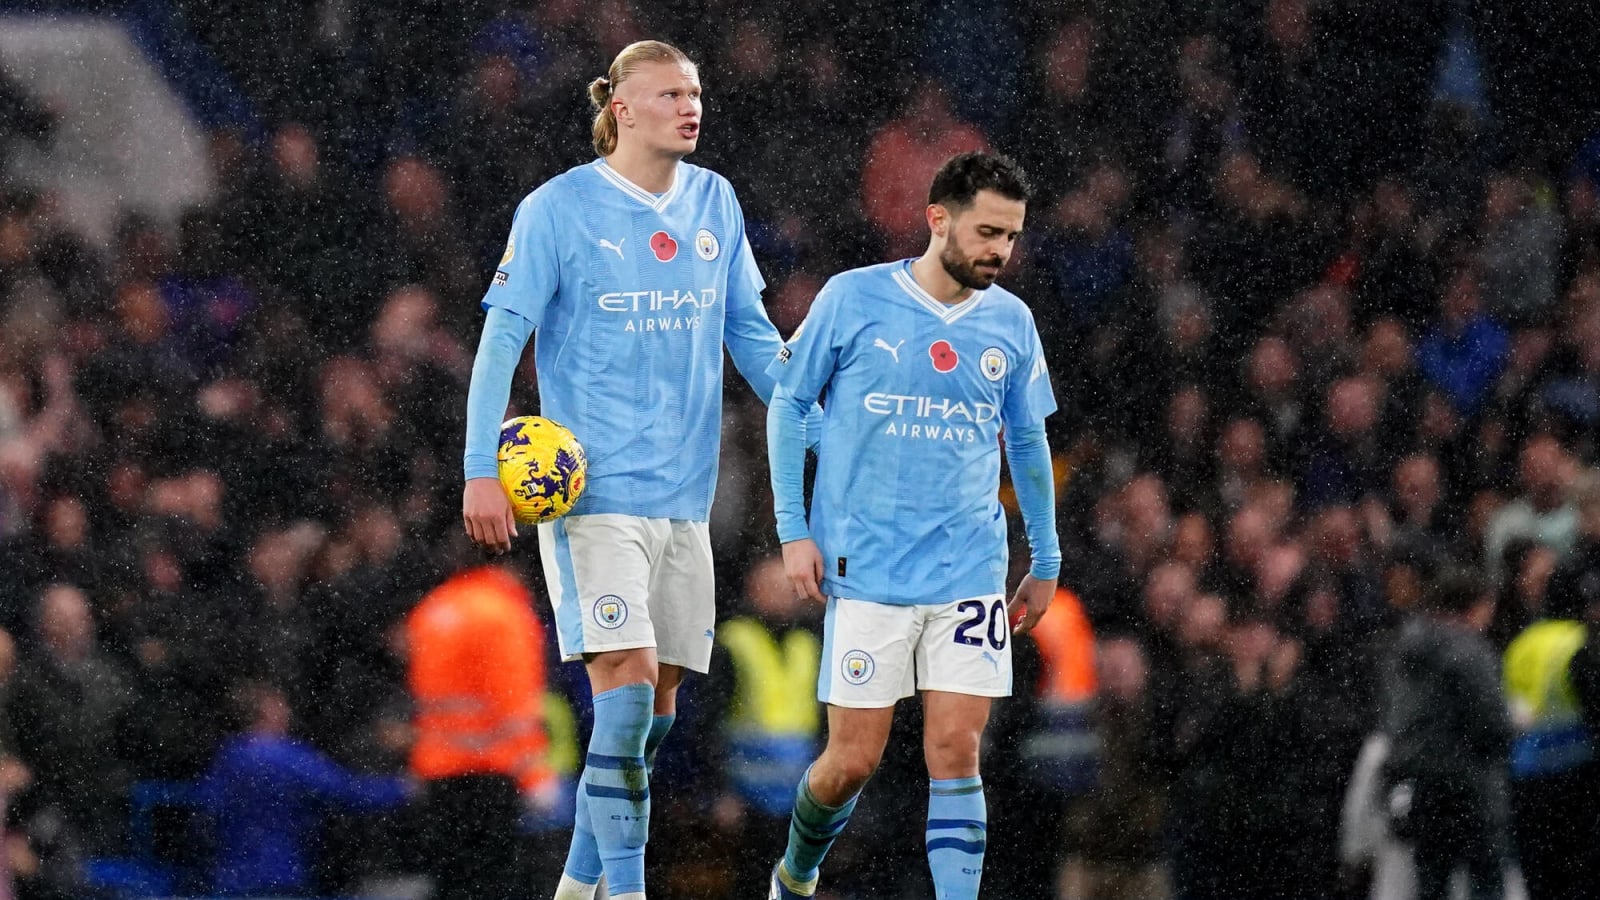 Manchester City player ratings: Haaland scores brace as City